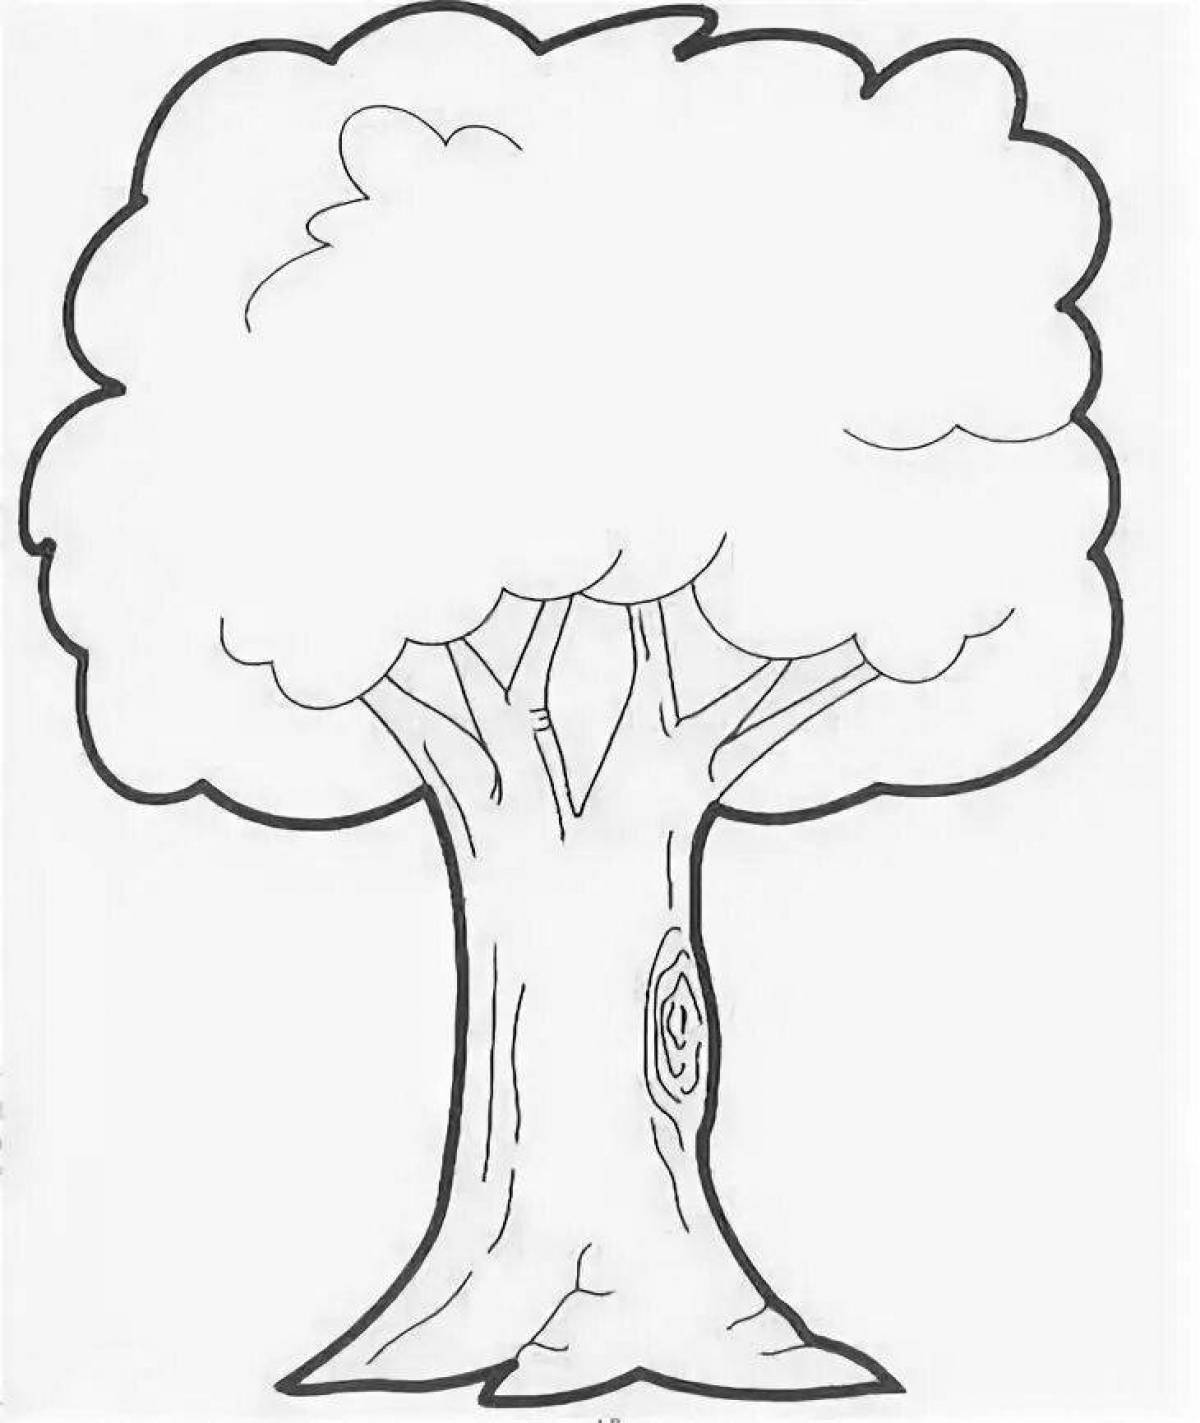 Coloring book magic tree for kids